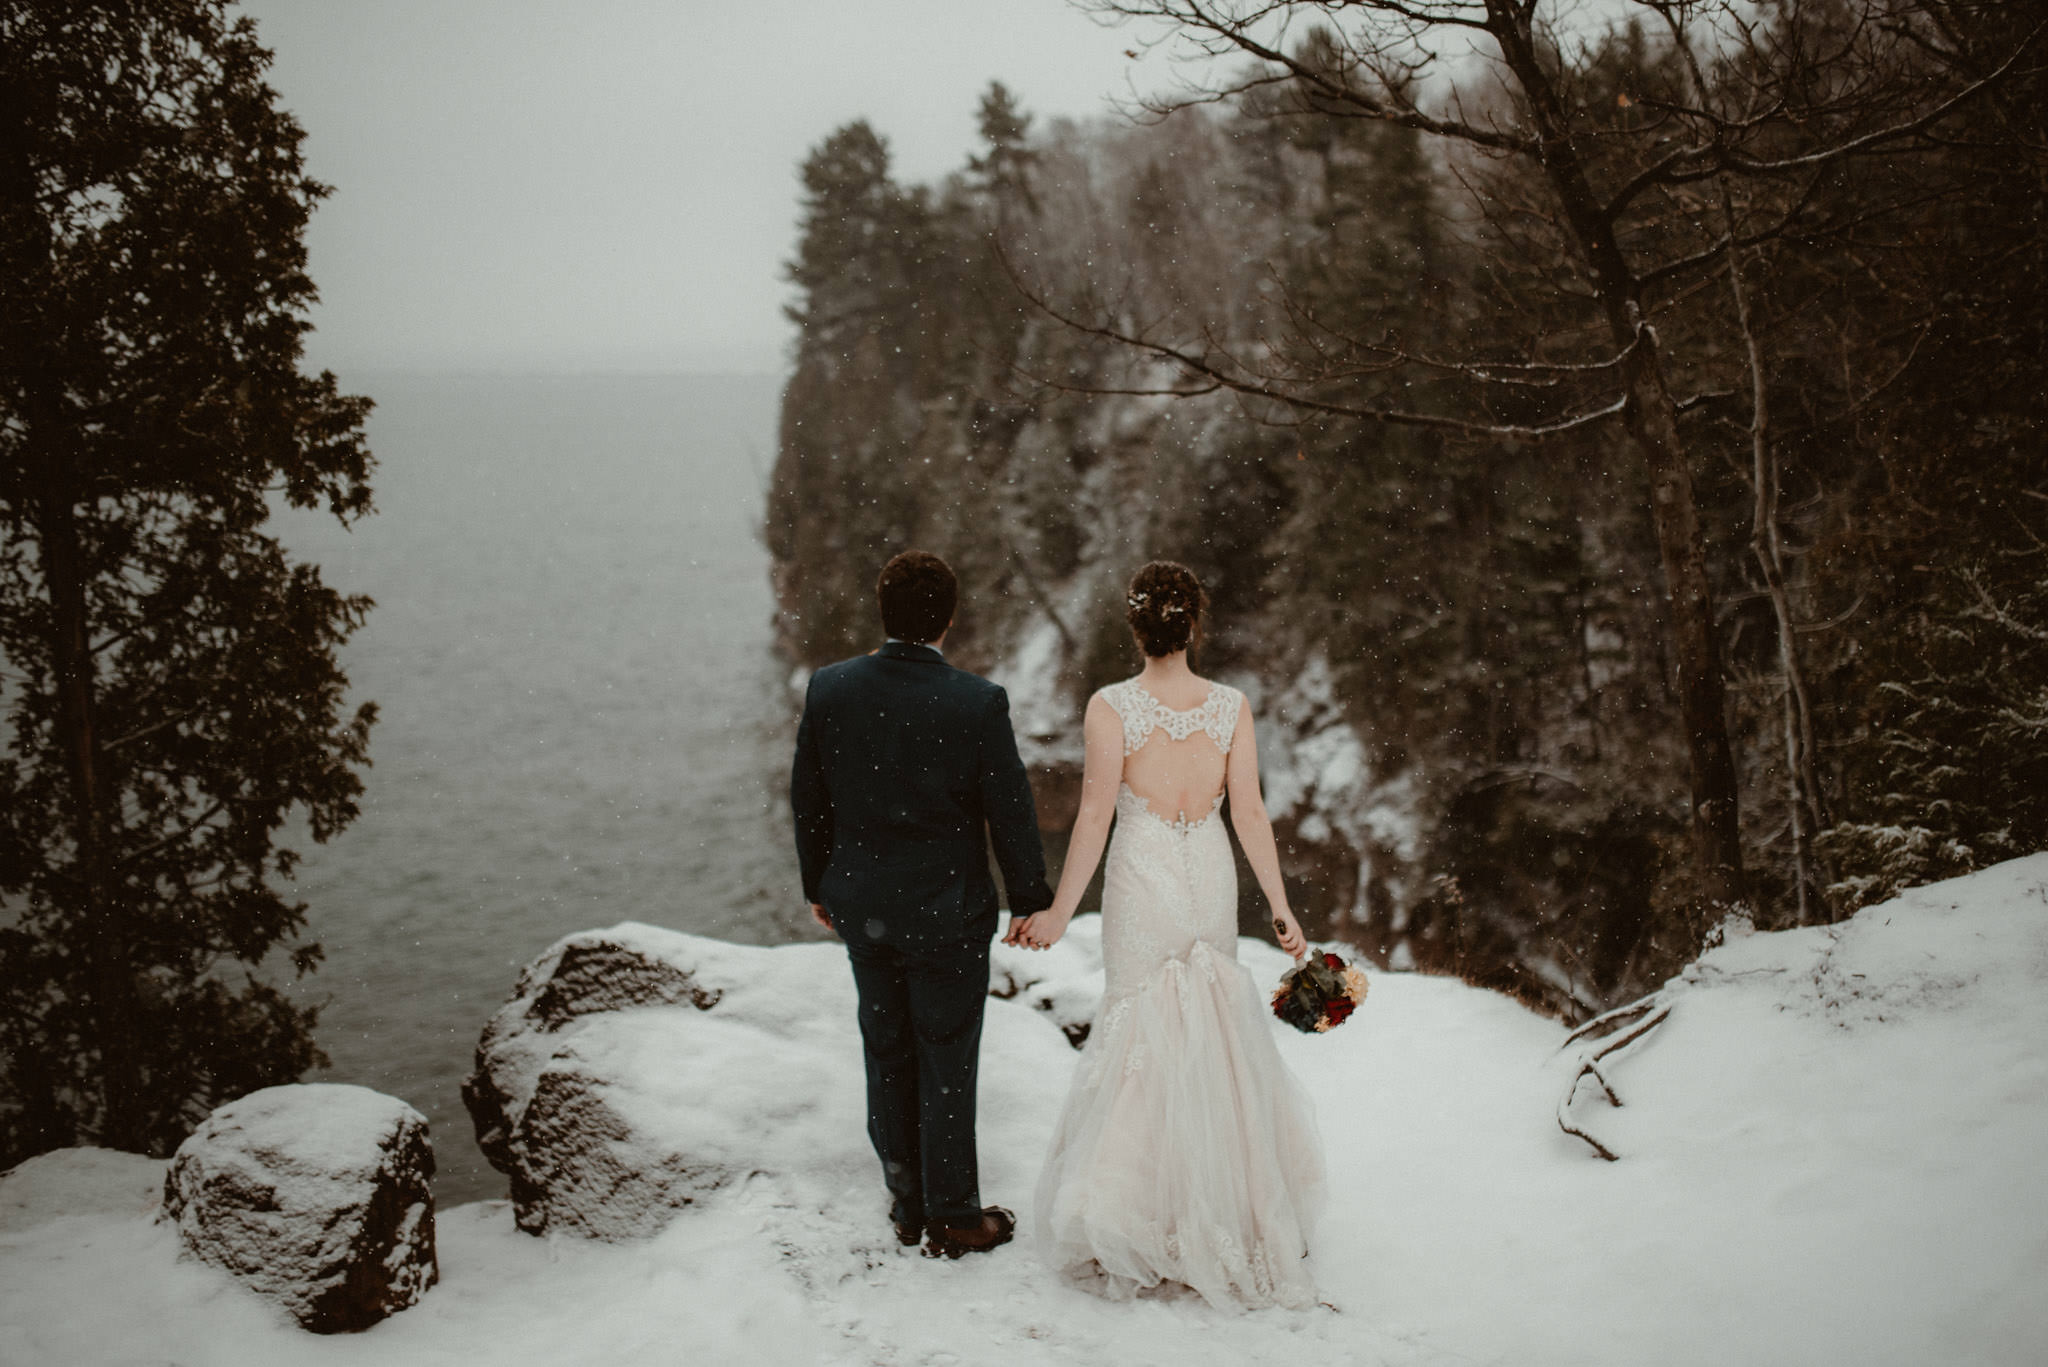 Sugarloaf Mountain Elopement In Winter